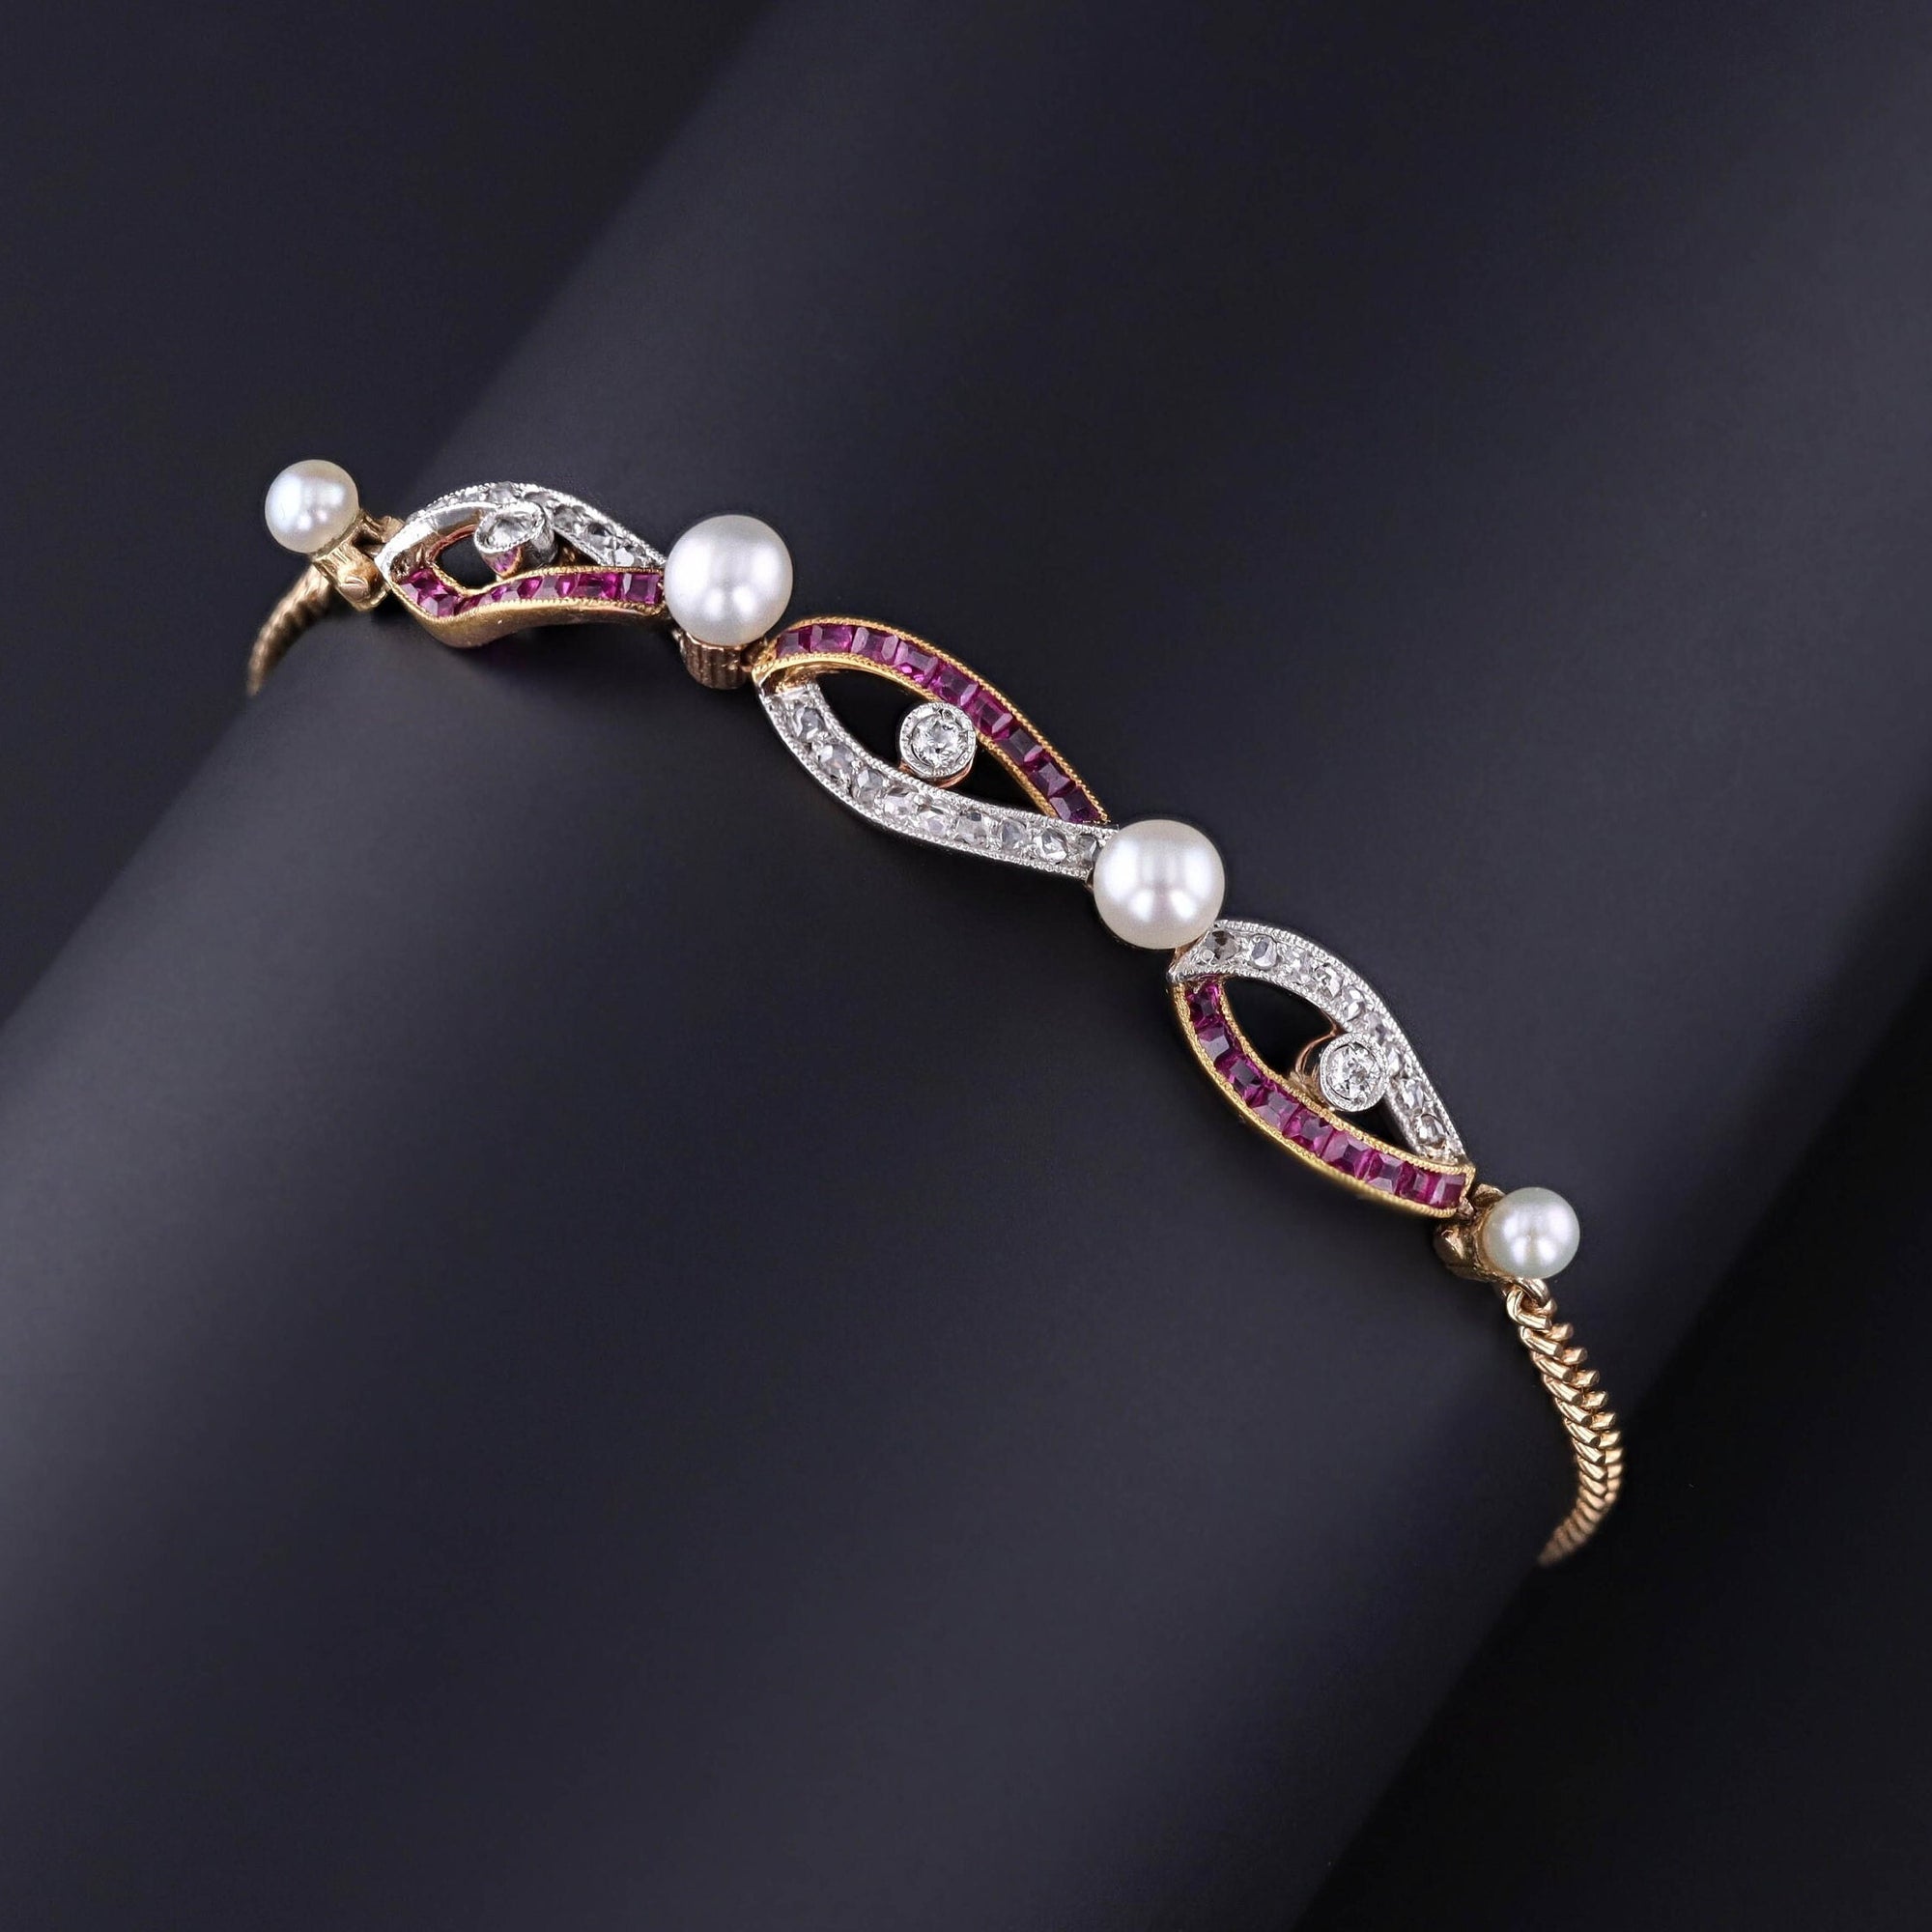 An Edwardian era bracelet with channel set natural rubies, rose cut diamonds, and four pearls. The bracelet dates to the early 1900s and is 14k gold with platinum accents near the diamonds. It is in great condition and measures 7 inches.